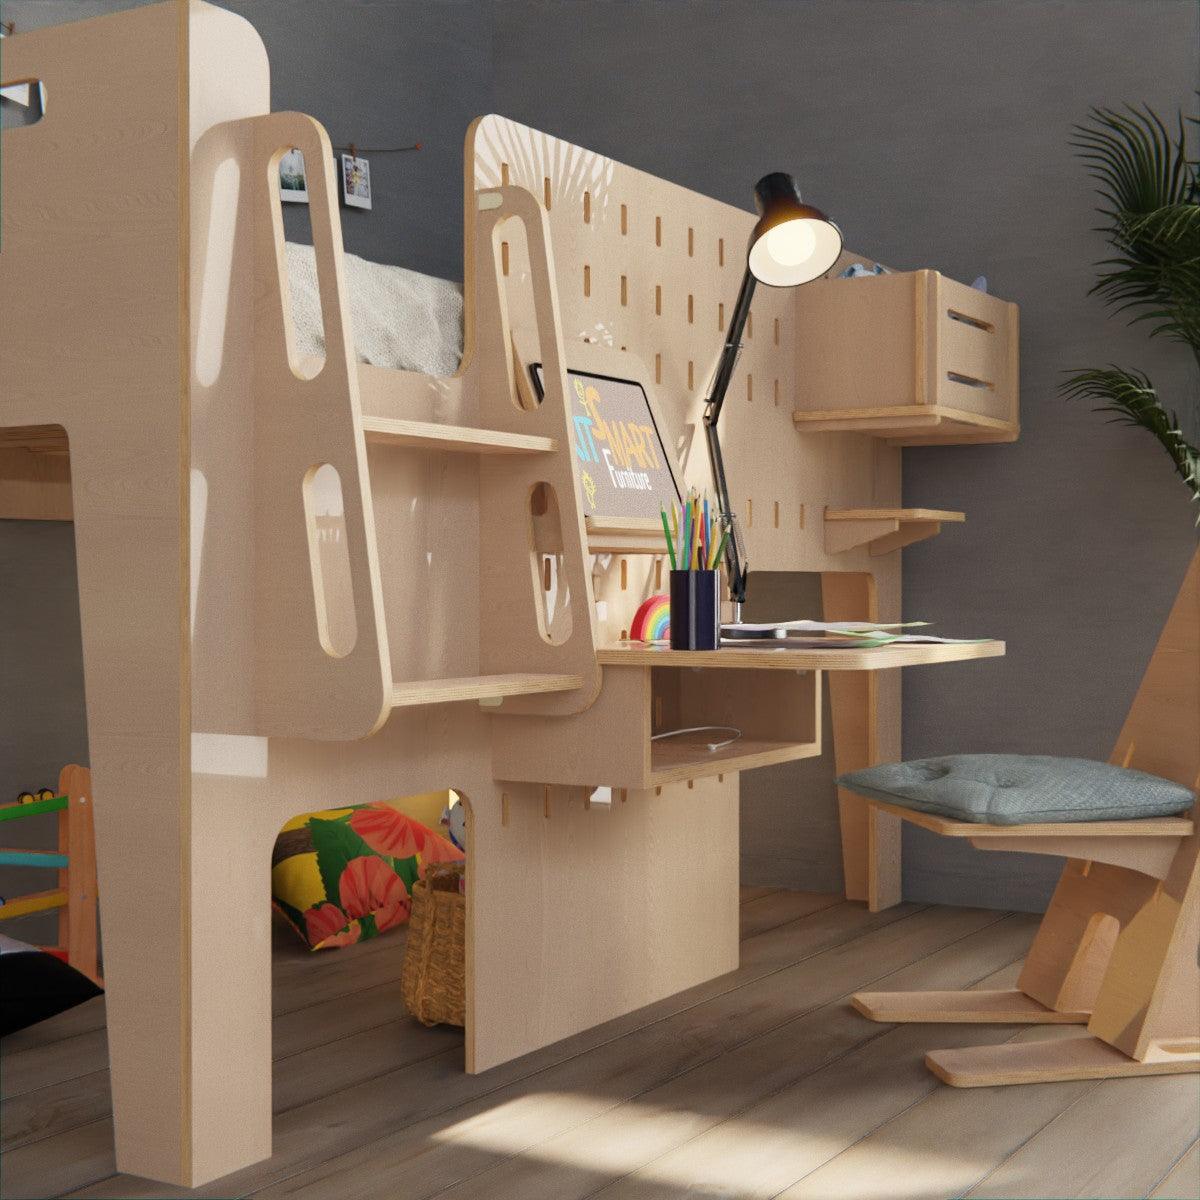 Comfort meets functionality: Kid's low loft plywood bed with desk.